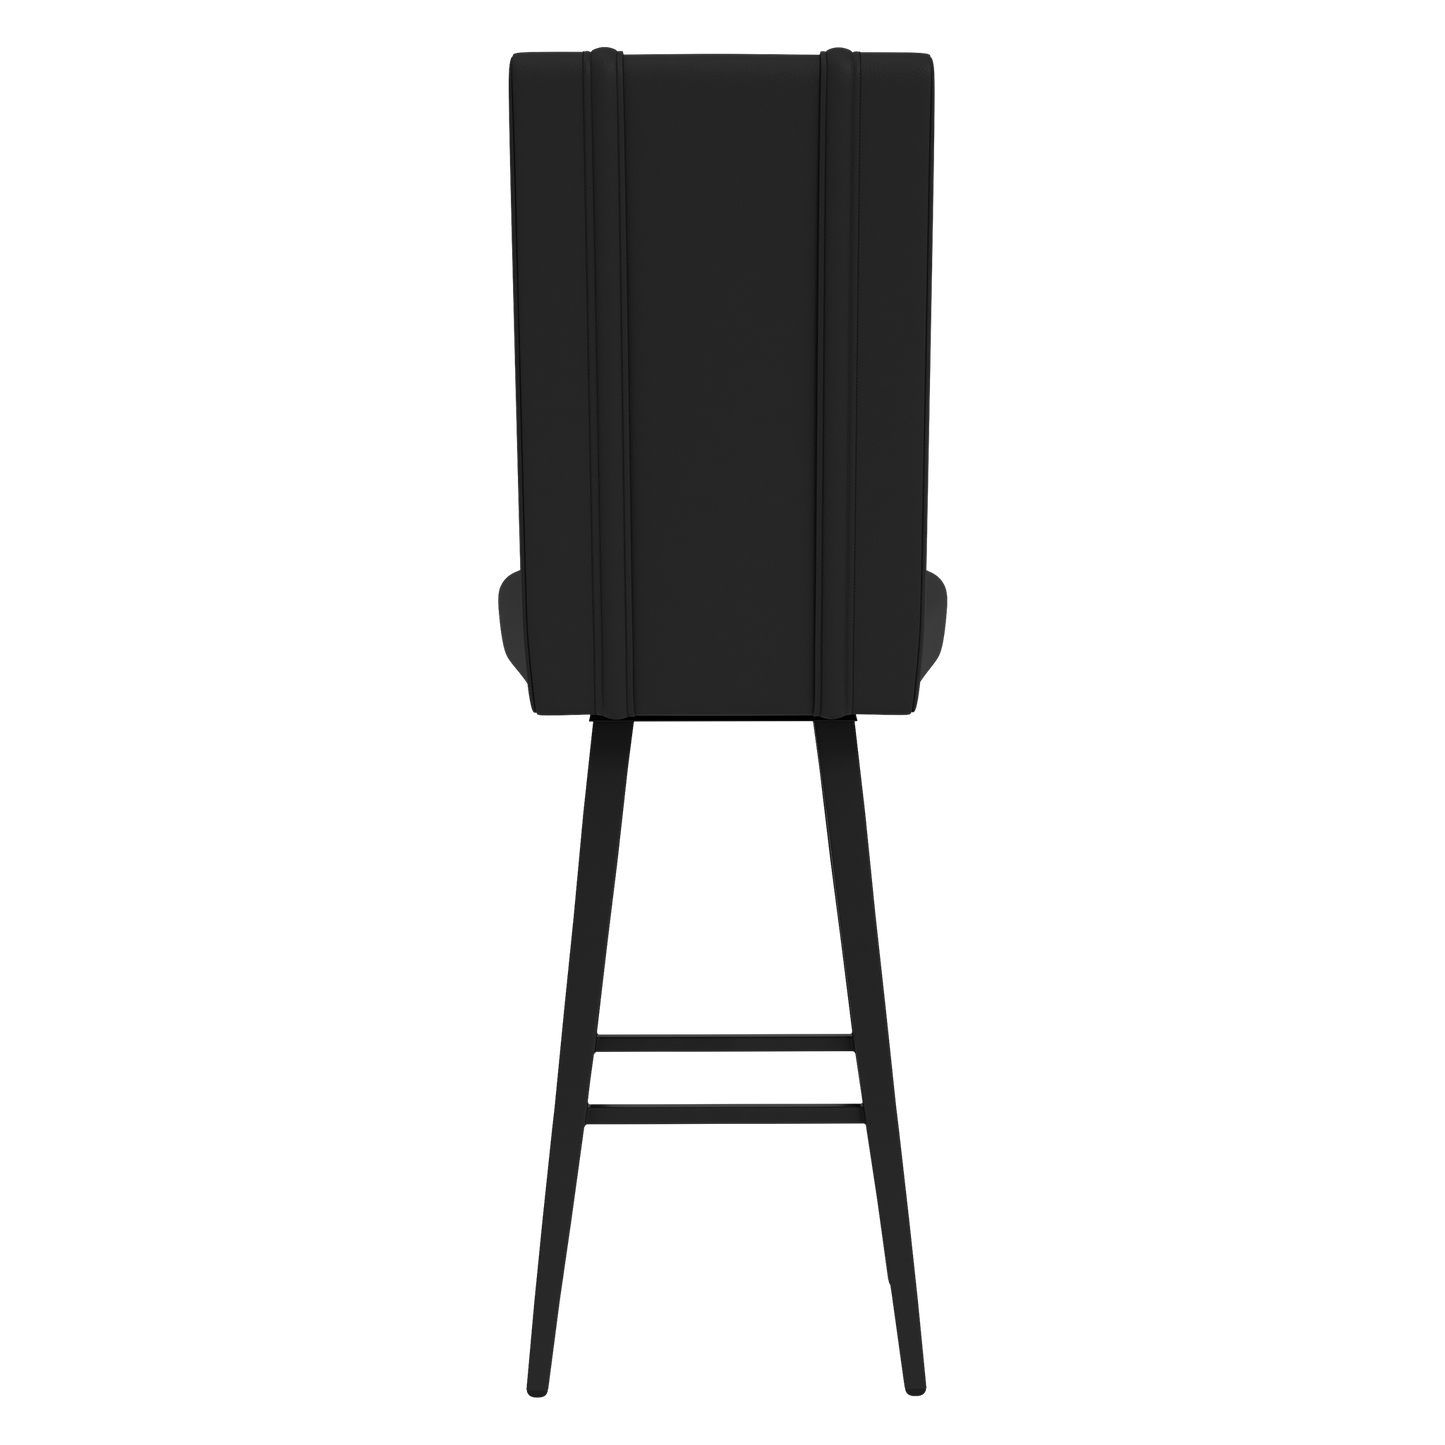 Swivel Bar Stool 2000 with Houston Astros Cooperstown